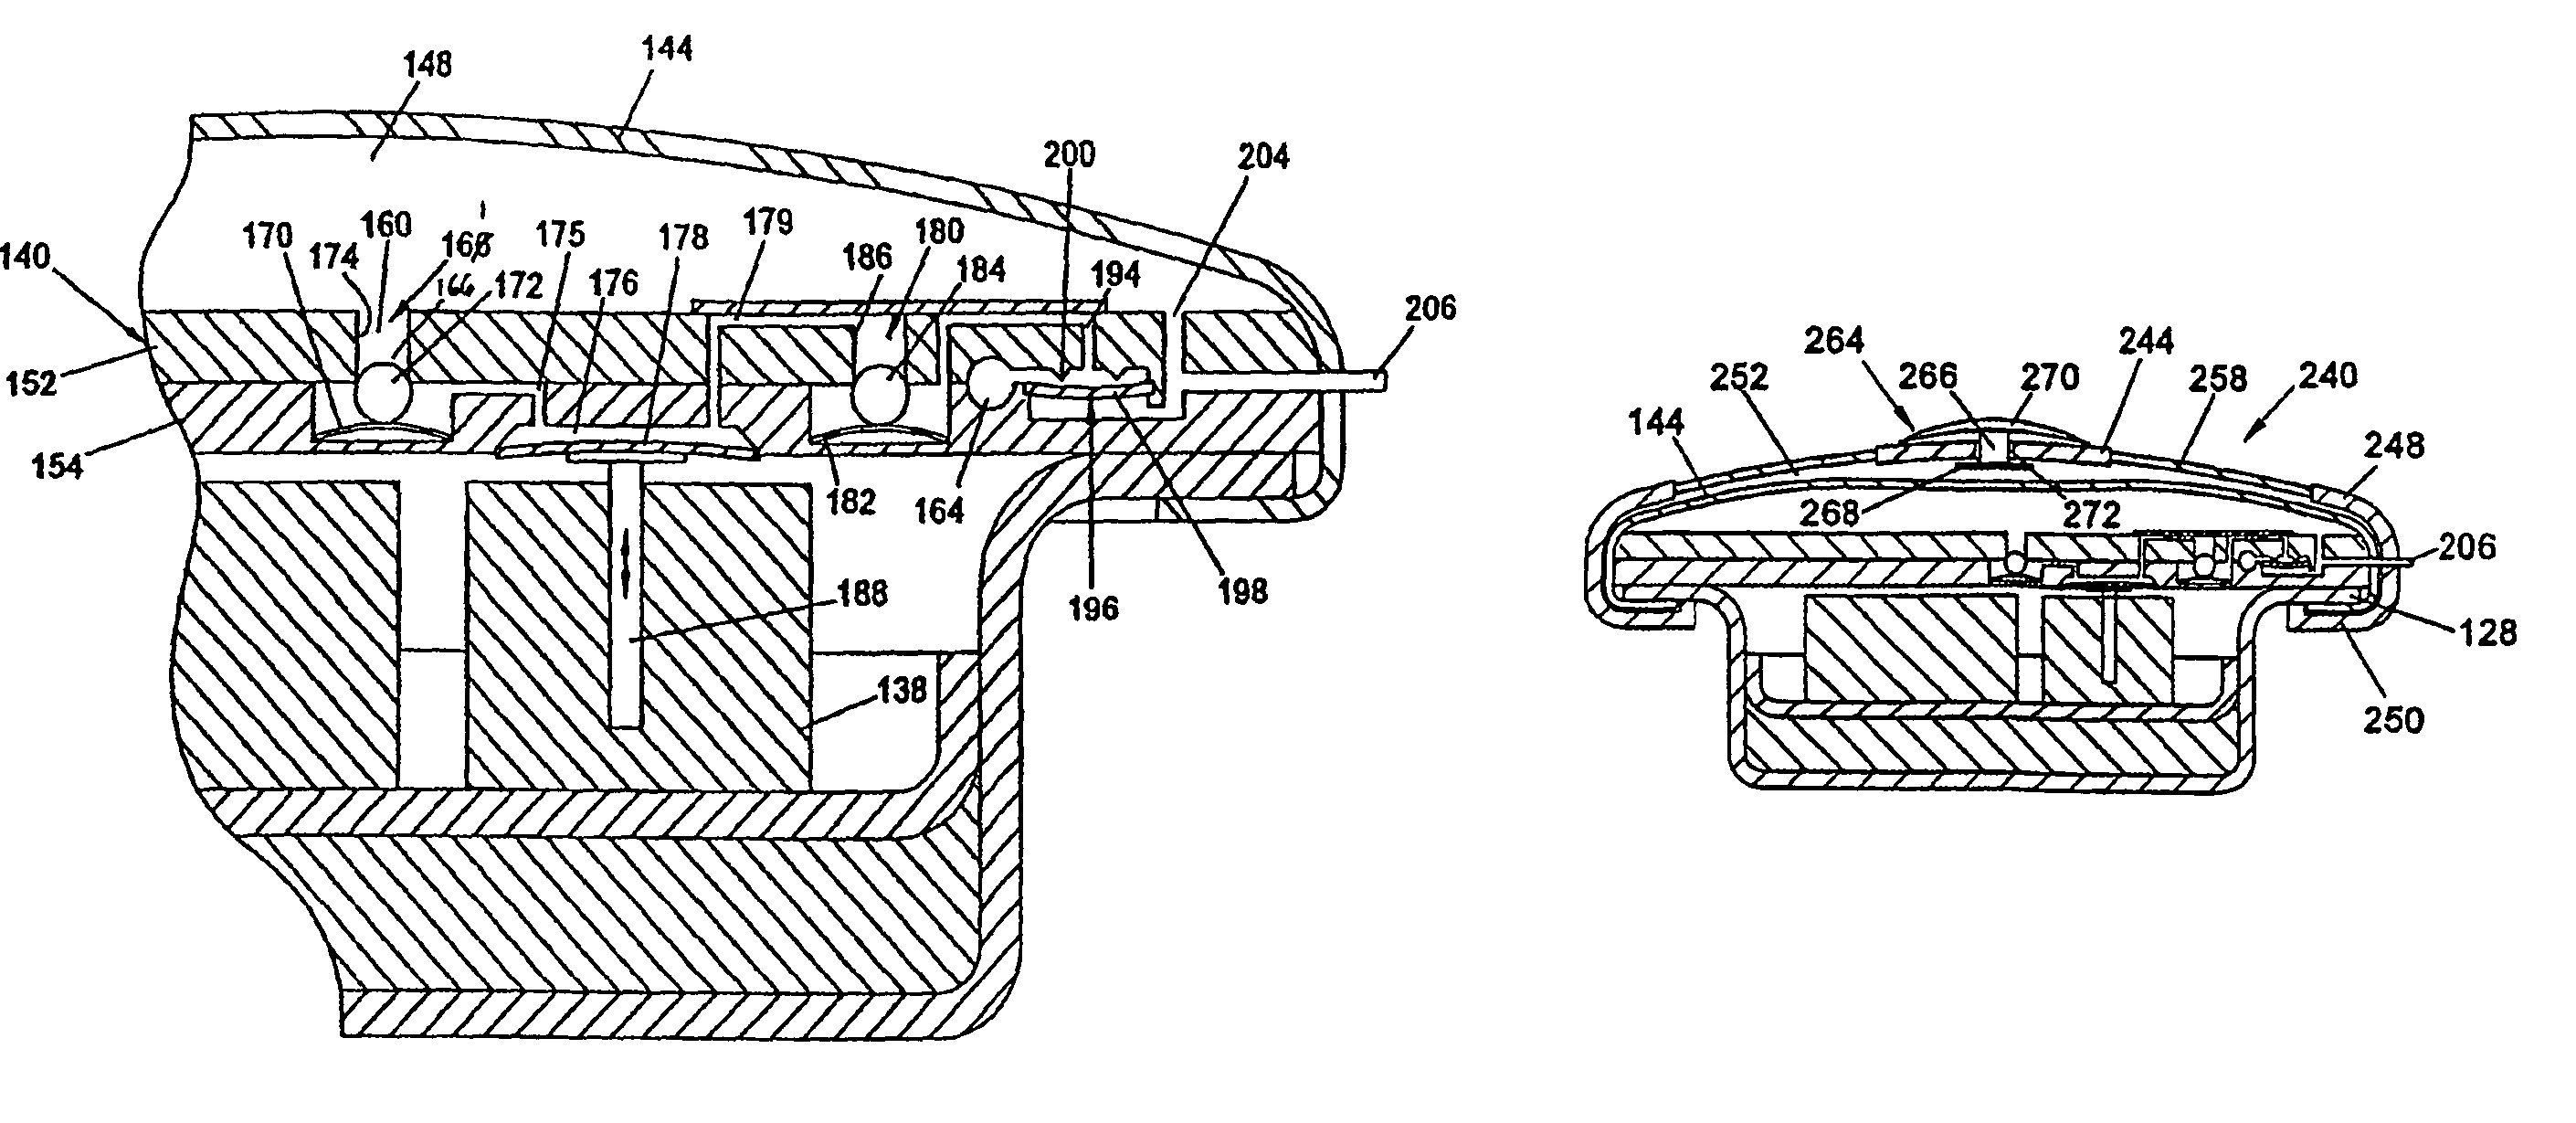 Implantable medication delivery device